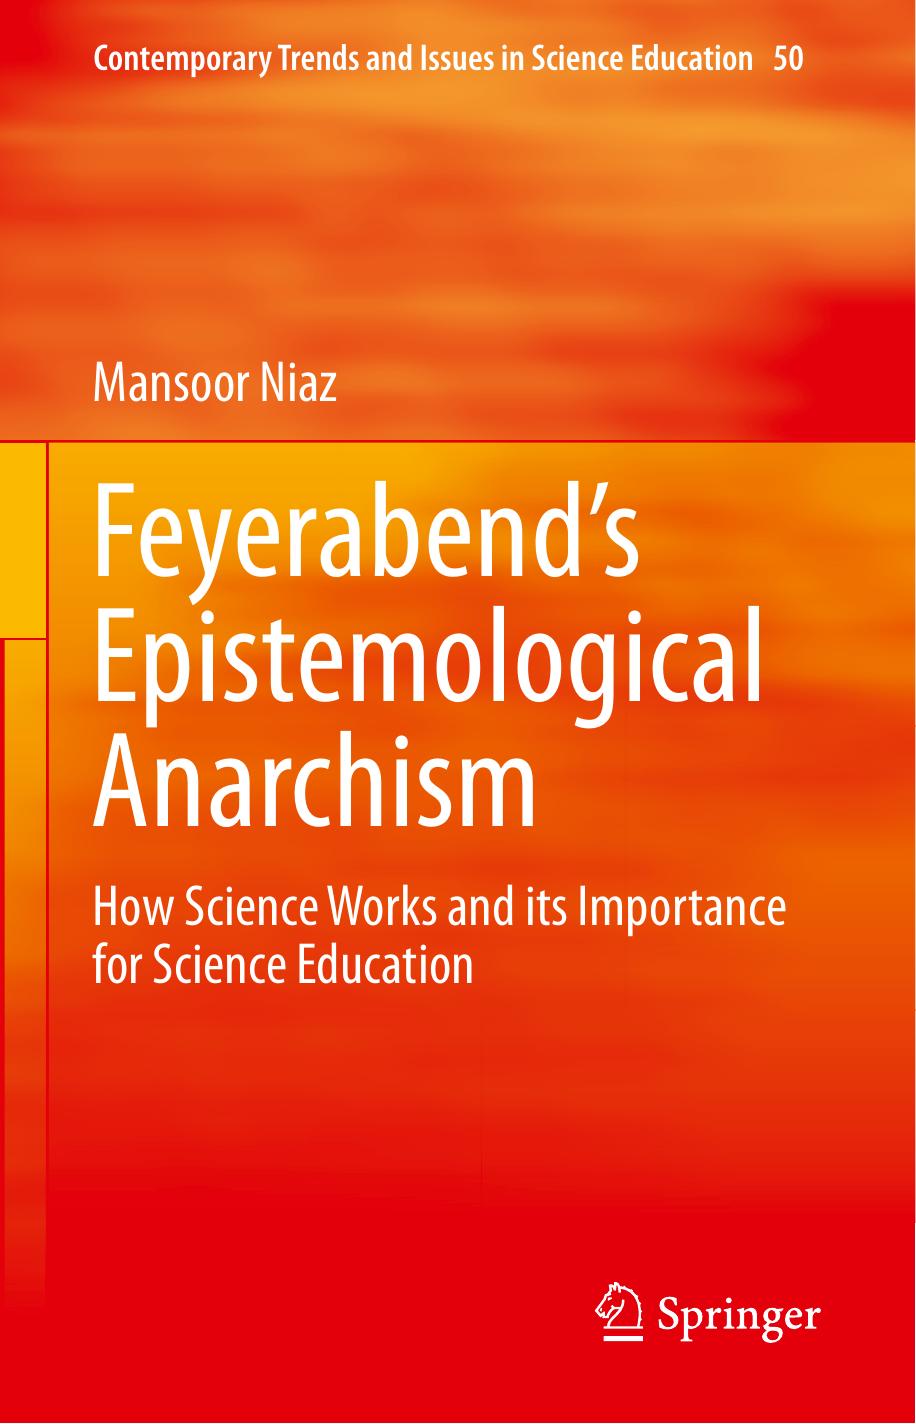 Feyerabend’s Epistemological Anarchism: How Science Works and Its Importance for Science Education